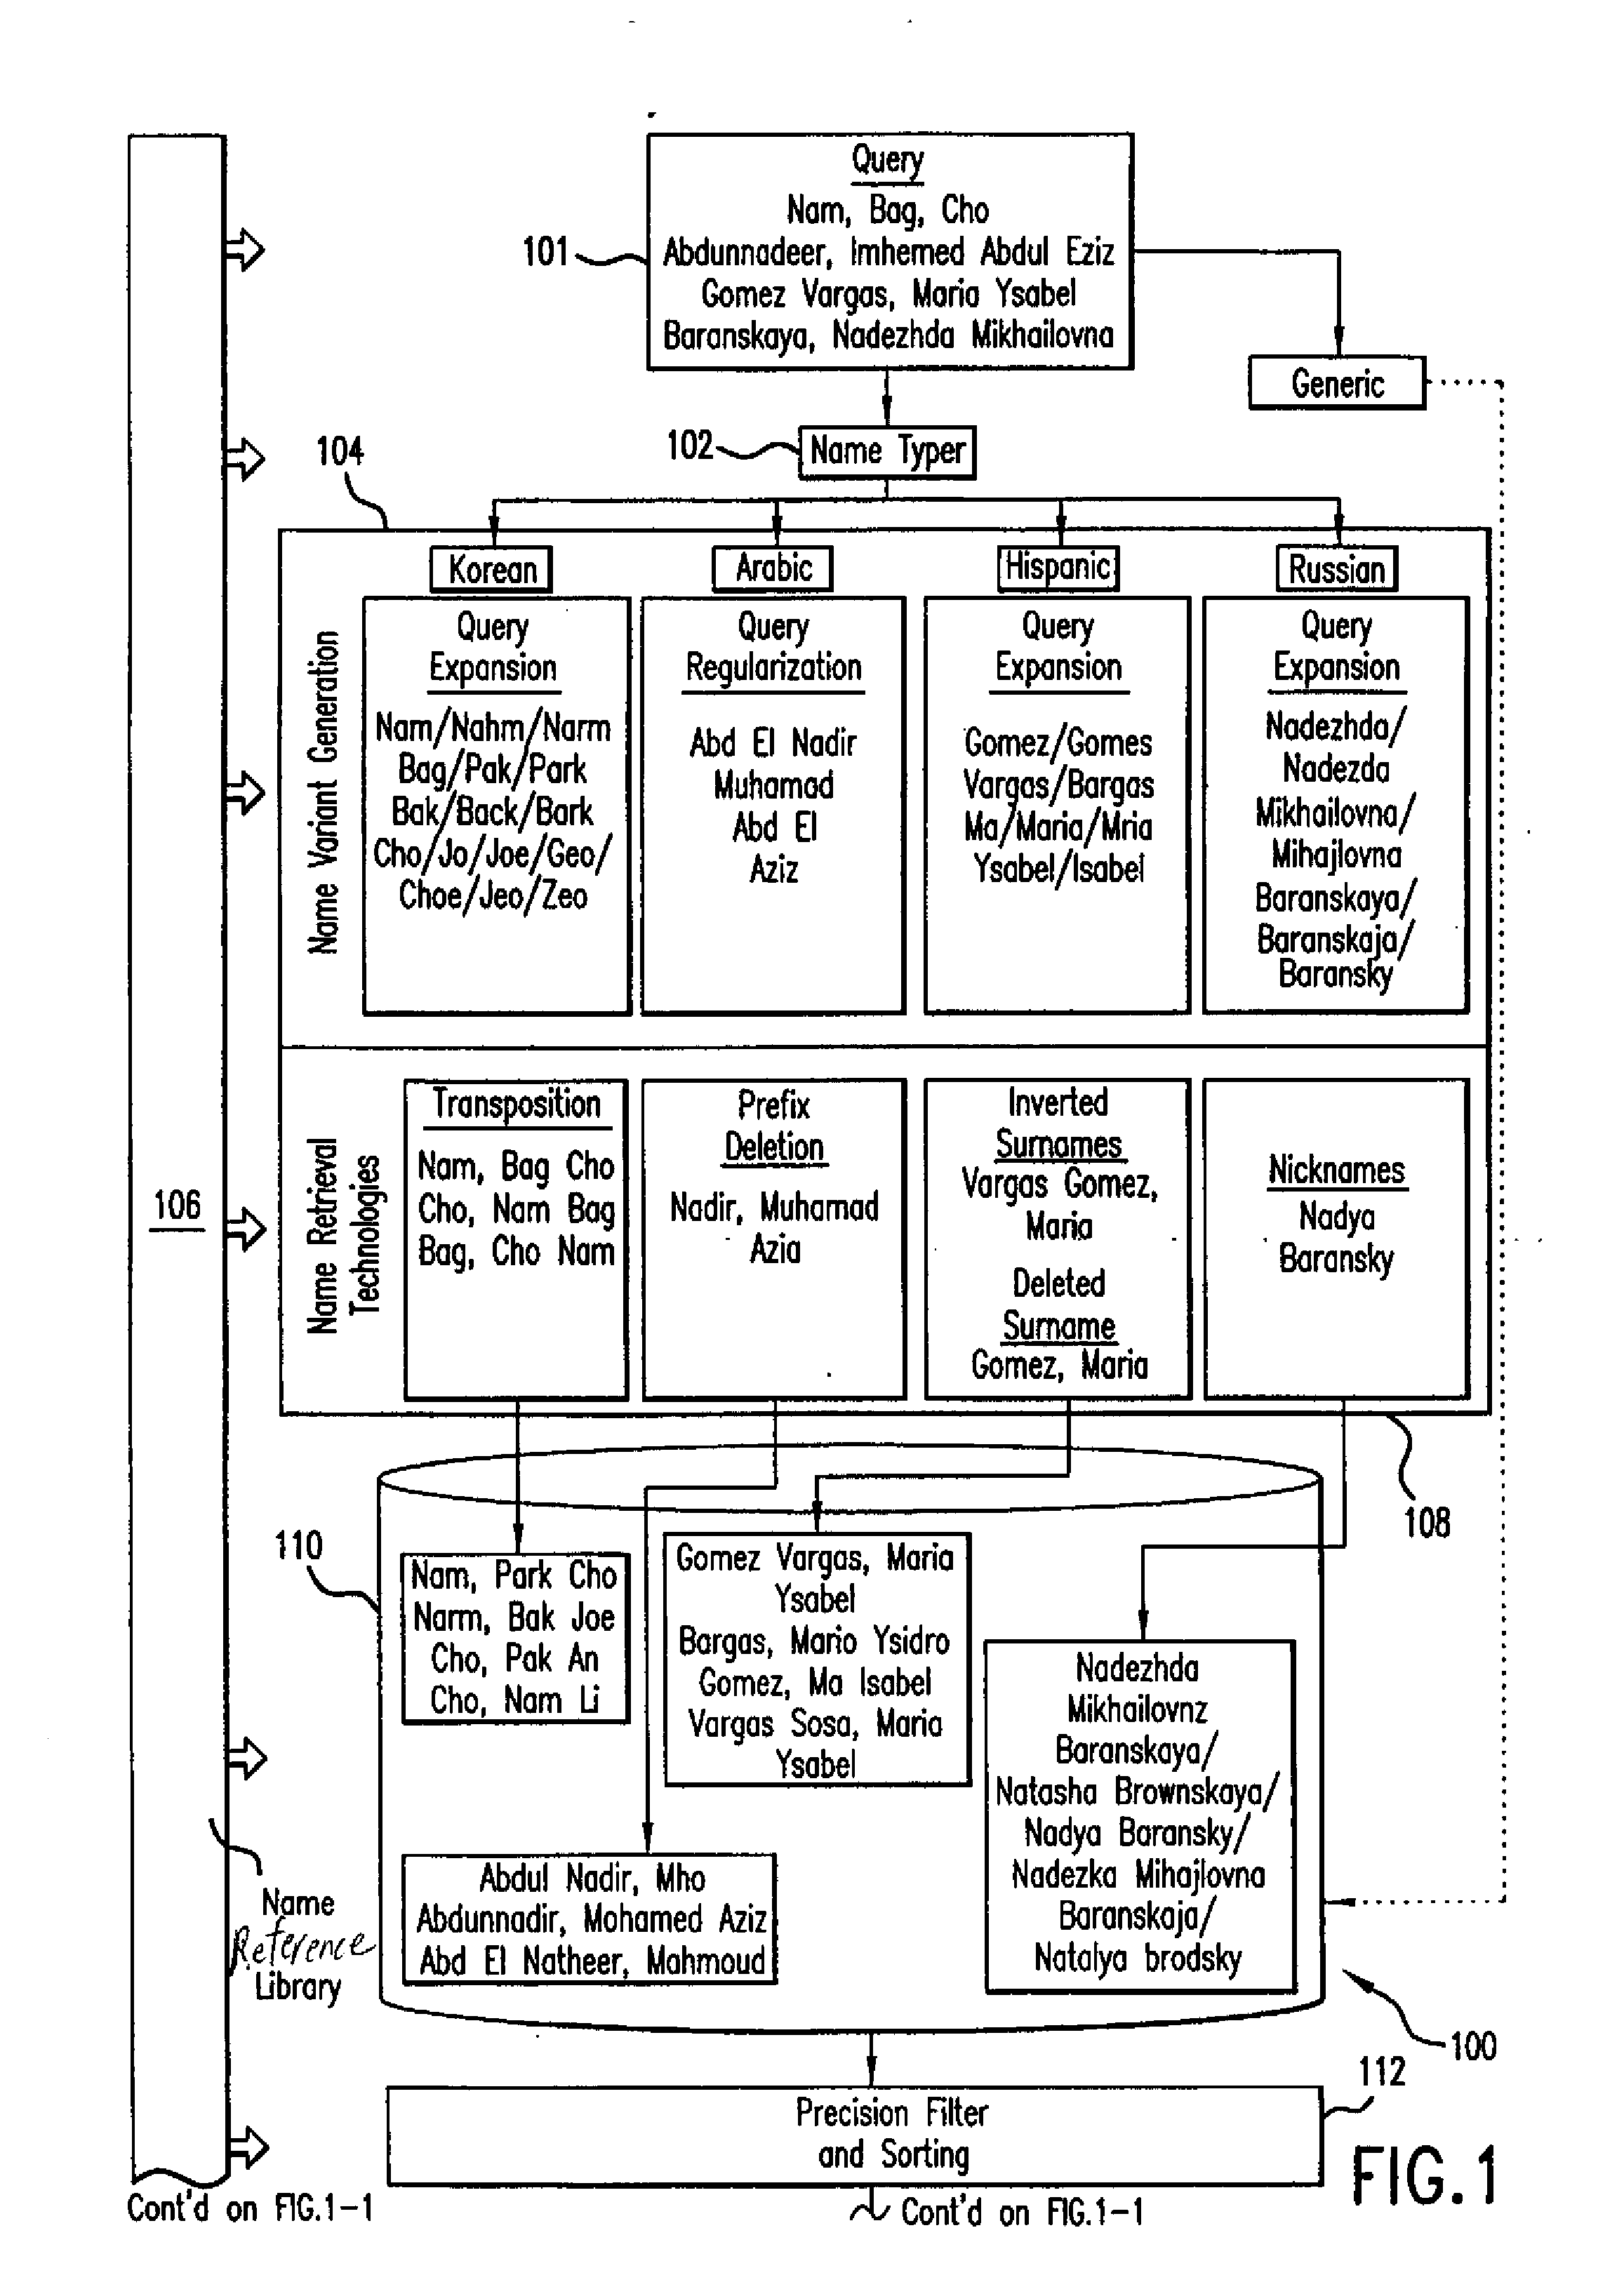 System and method for adaptive multi-cultural searching and matching of personal names